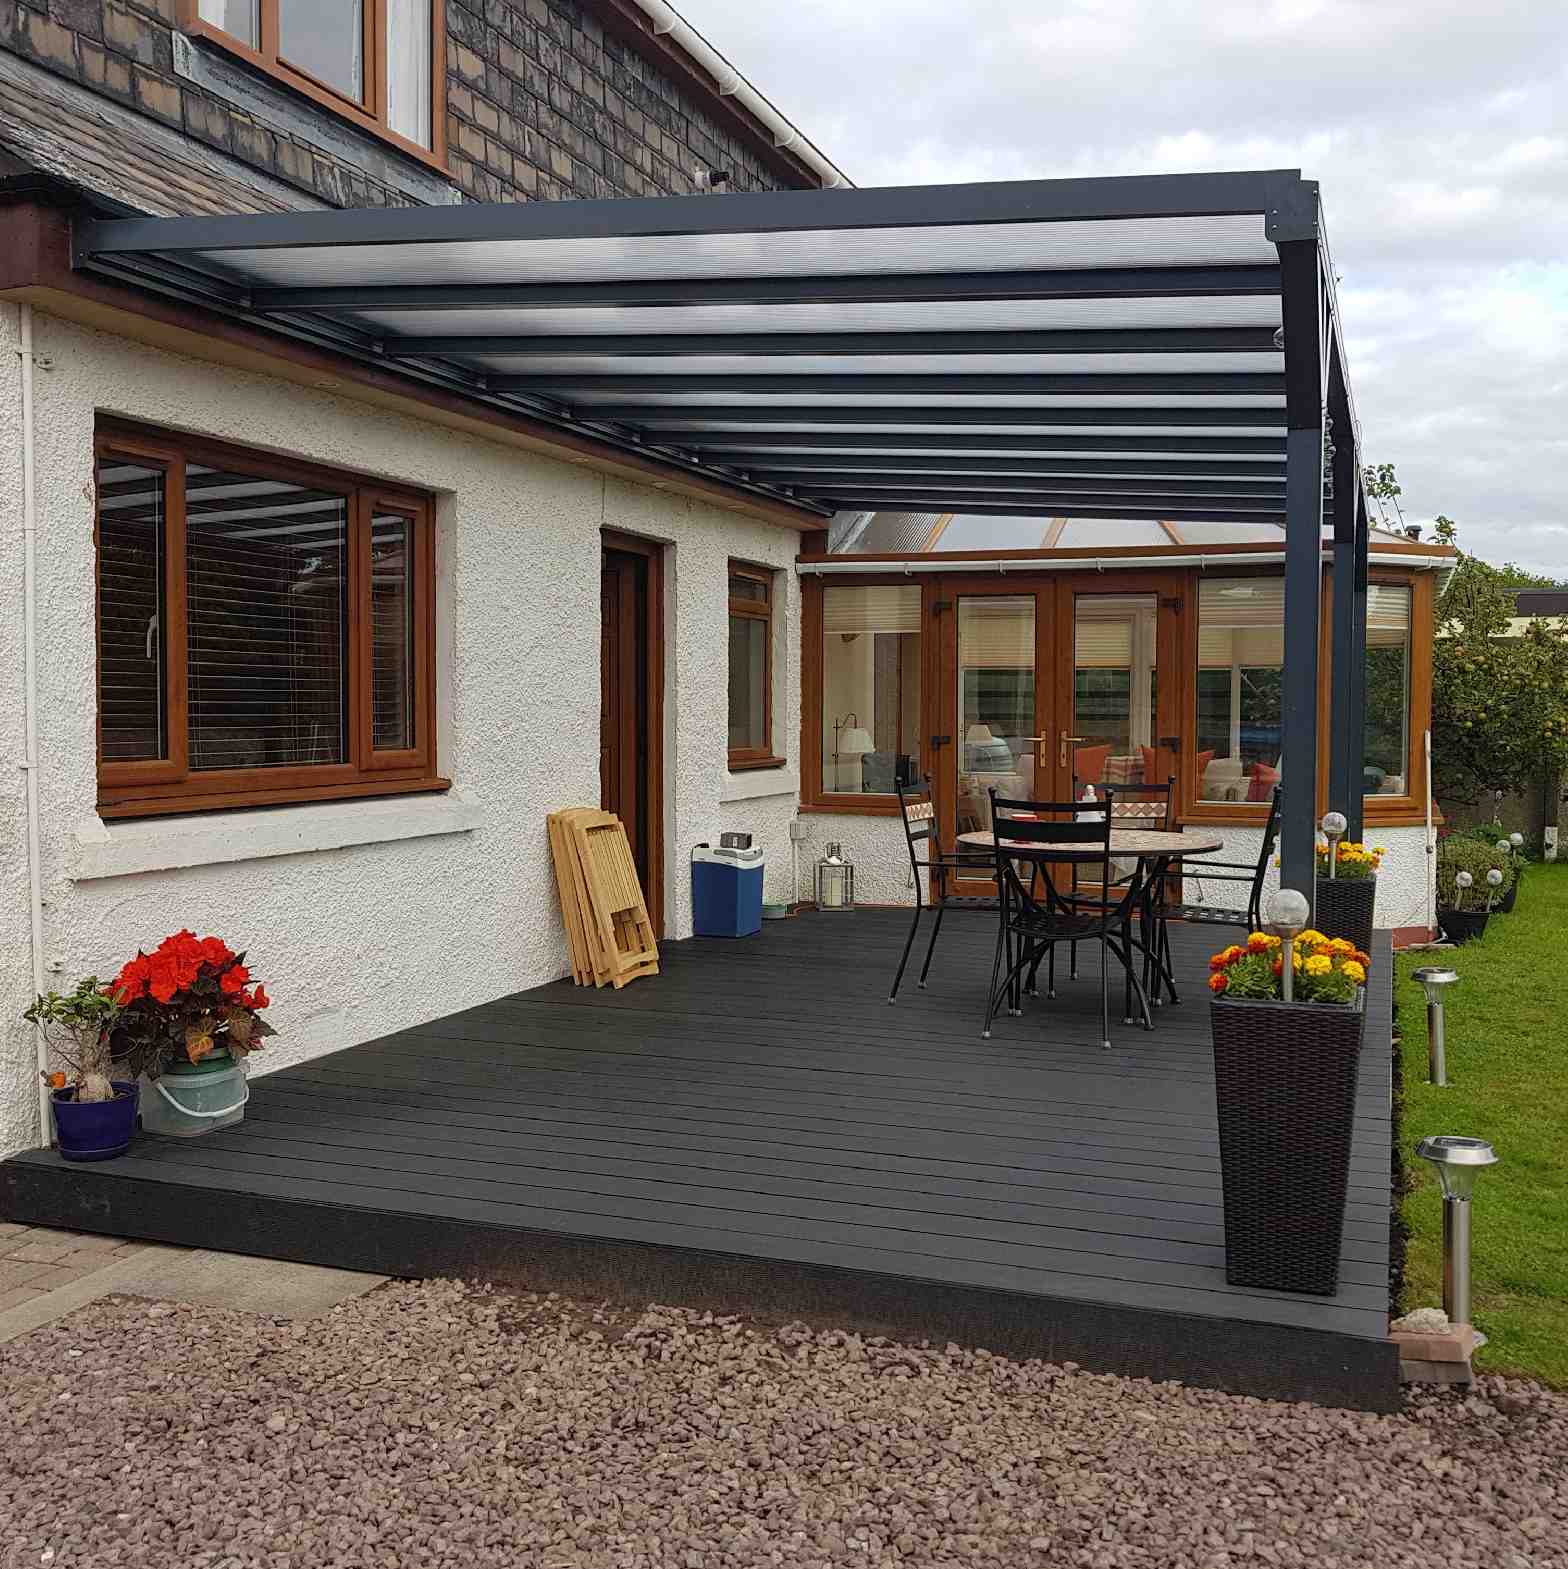 Buy Omega Verandah, Anthracite Grey, 16mm Polycarbonate Glazing - 6.0m (W) x 3.0m (P), (3) Supporting Posts online today